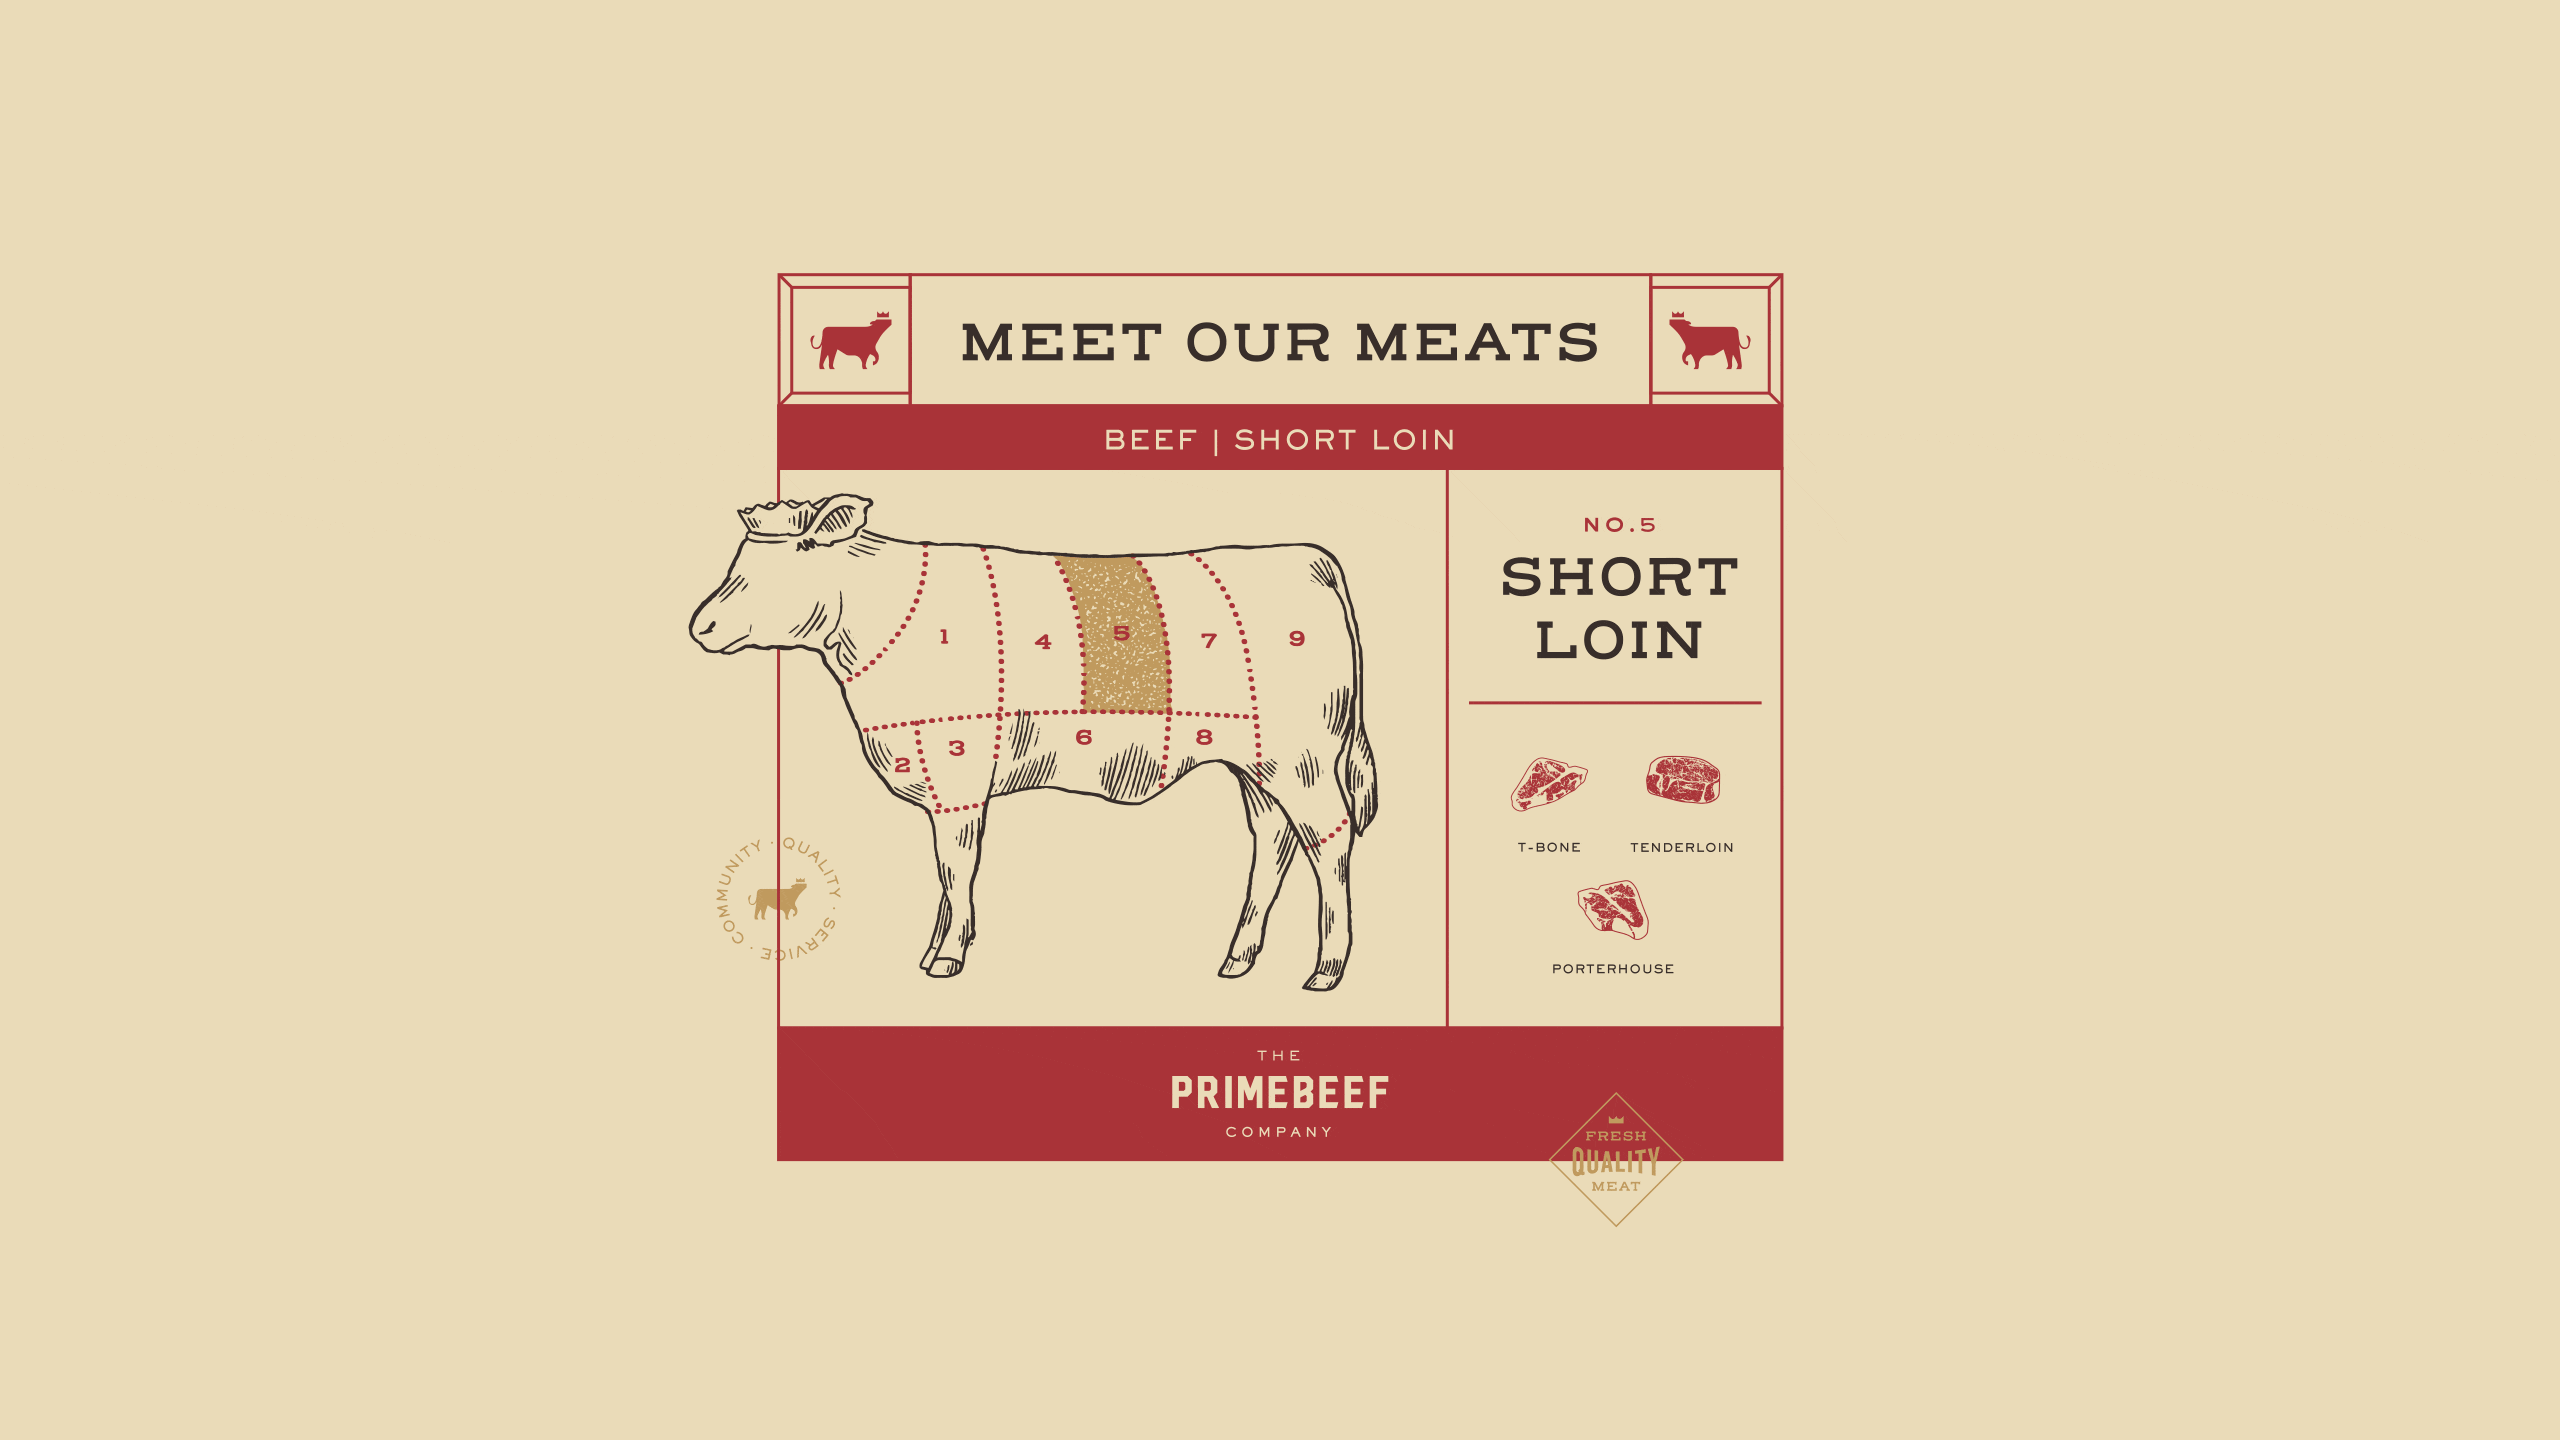 Illustrations and branding for Filipino meat brand Primebeef